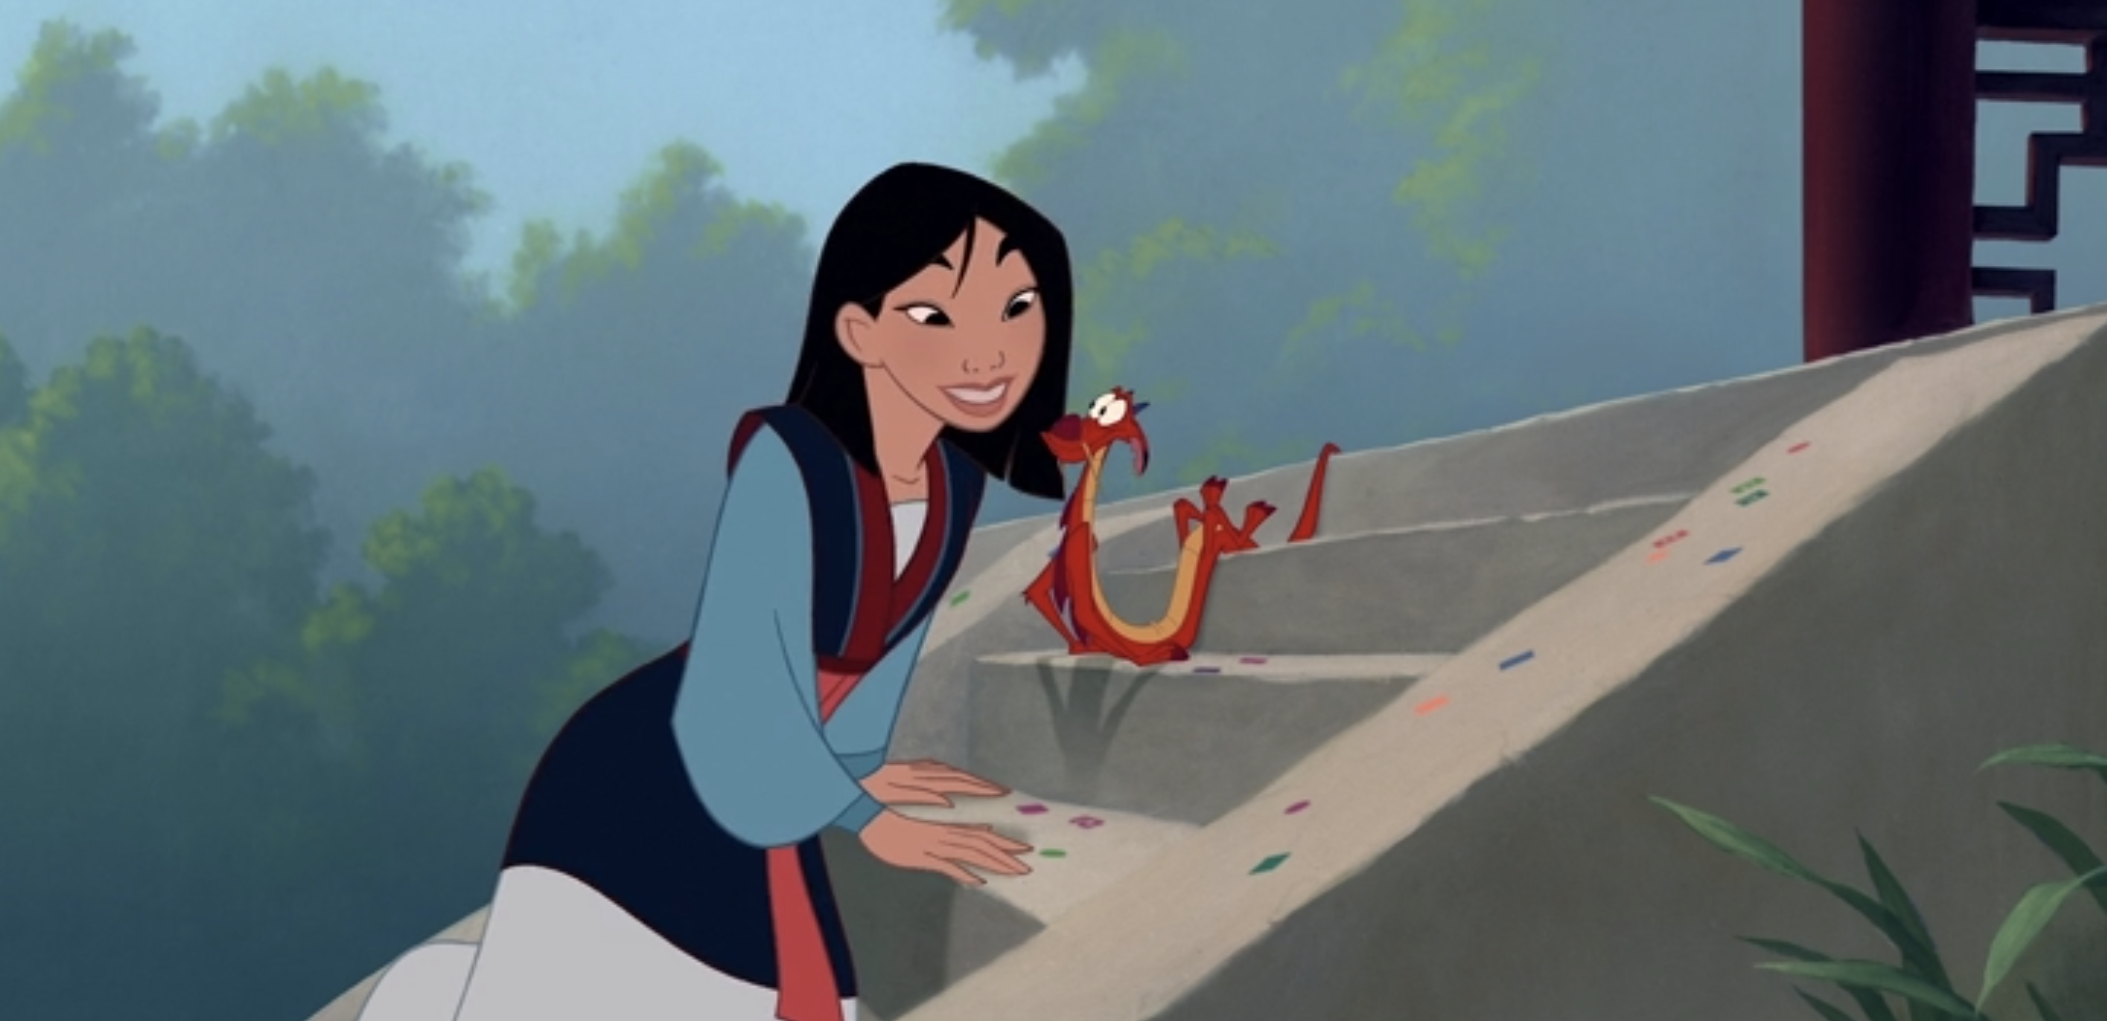 Mulan thanks Mushu after they return home in &quot;Mulan&quot;